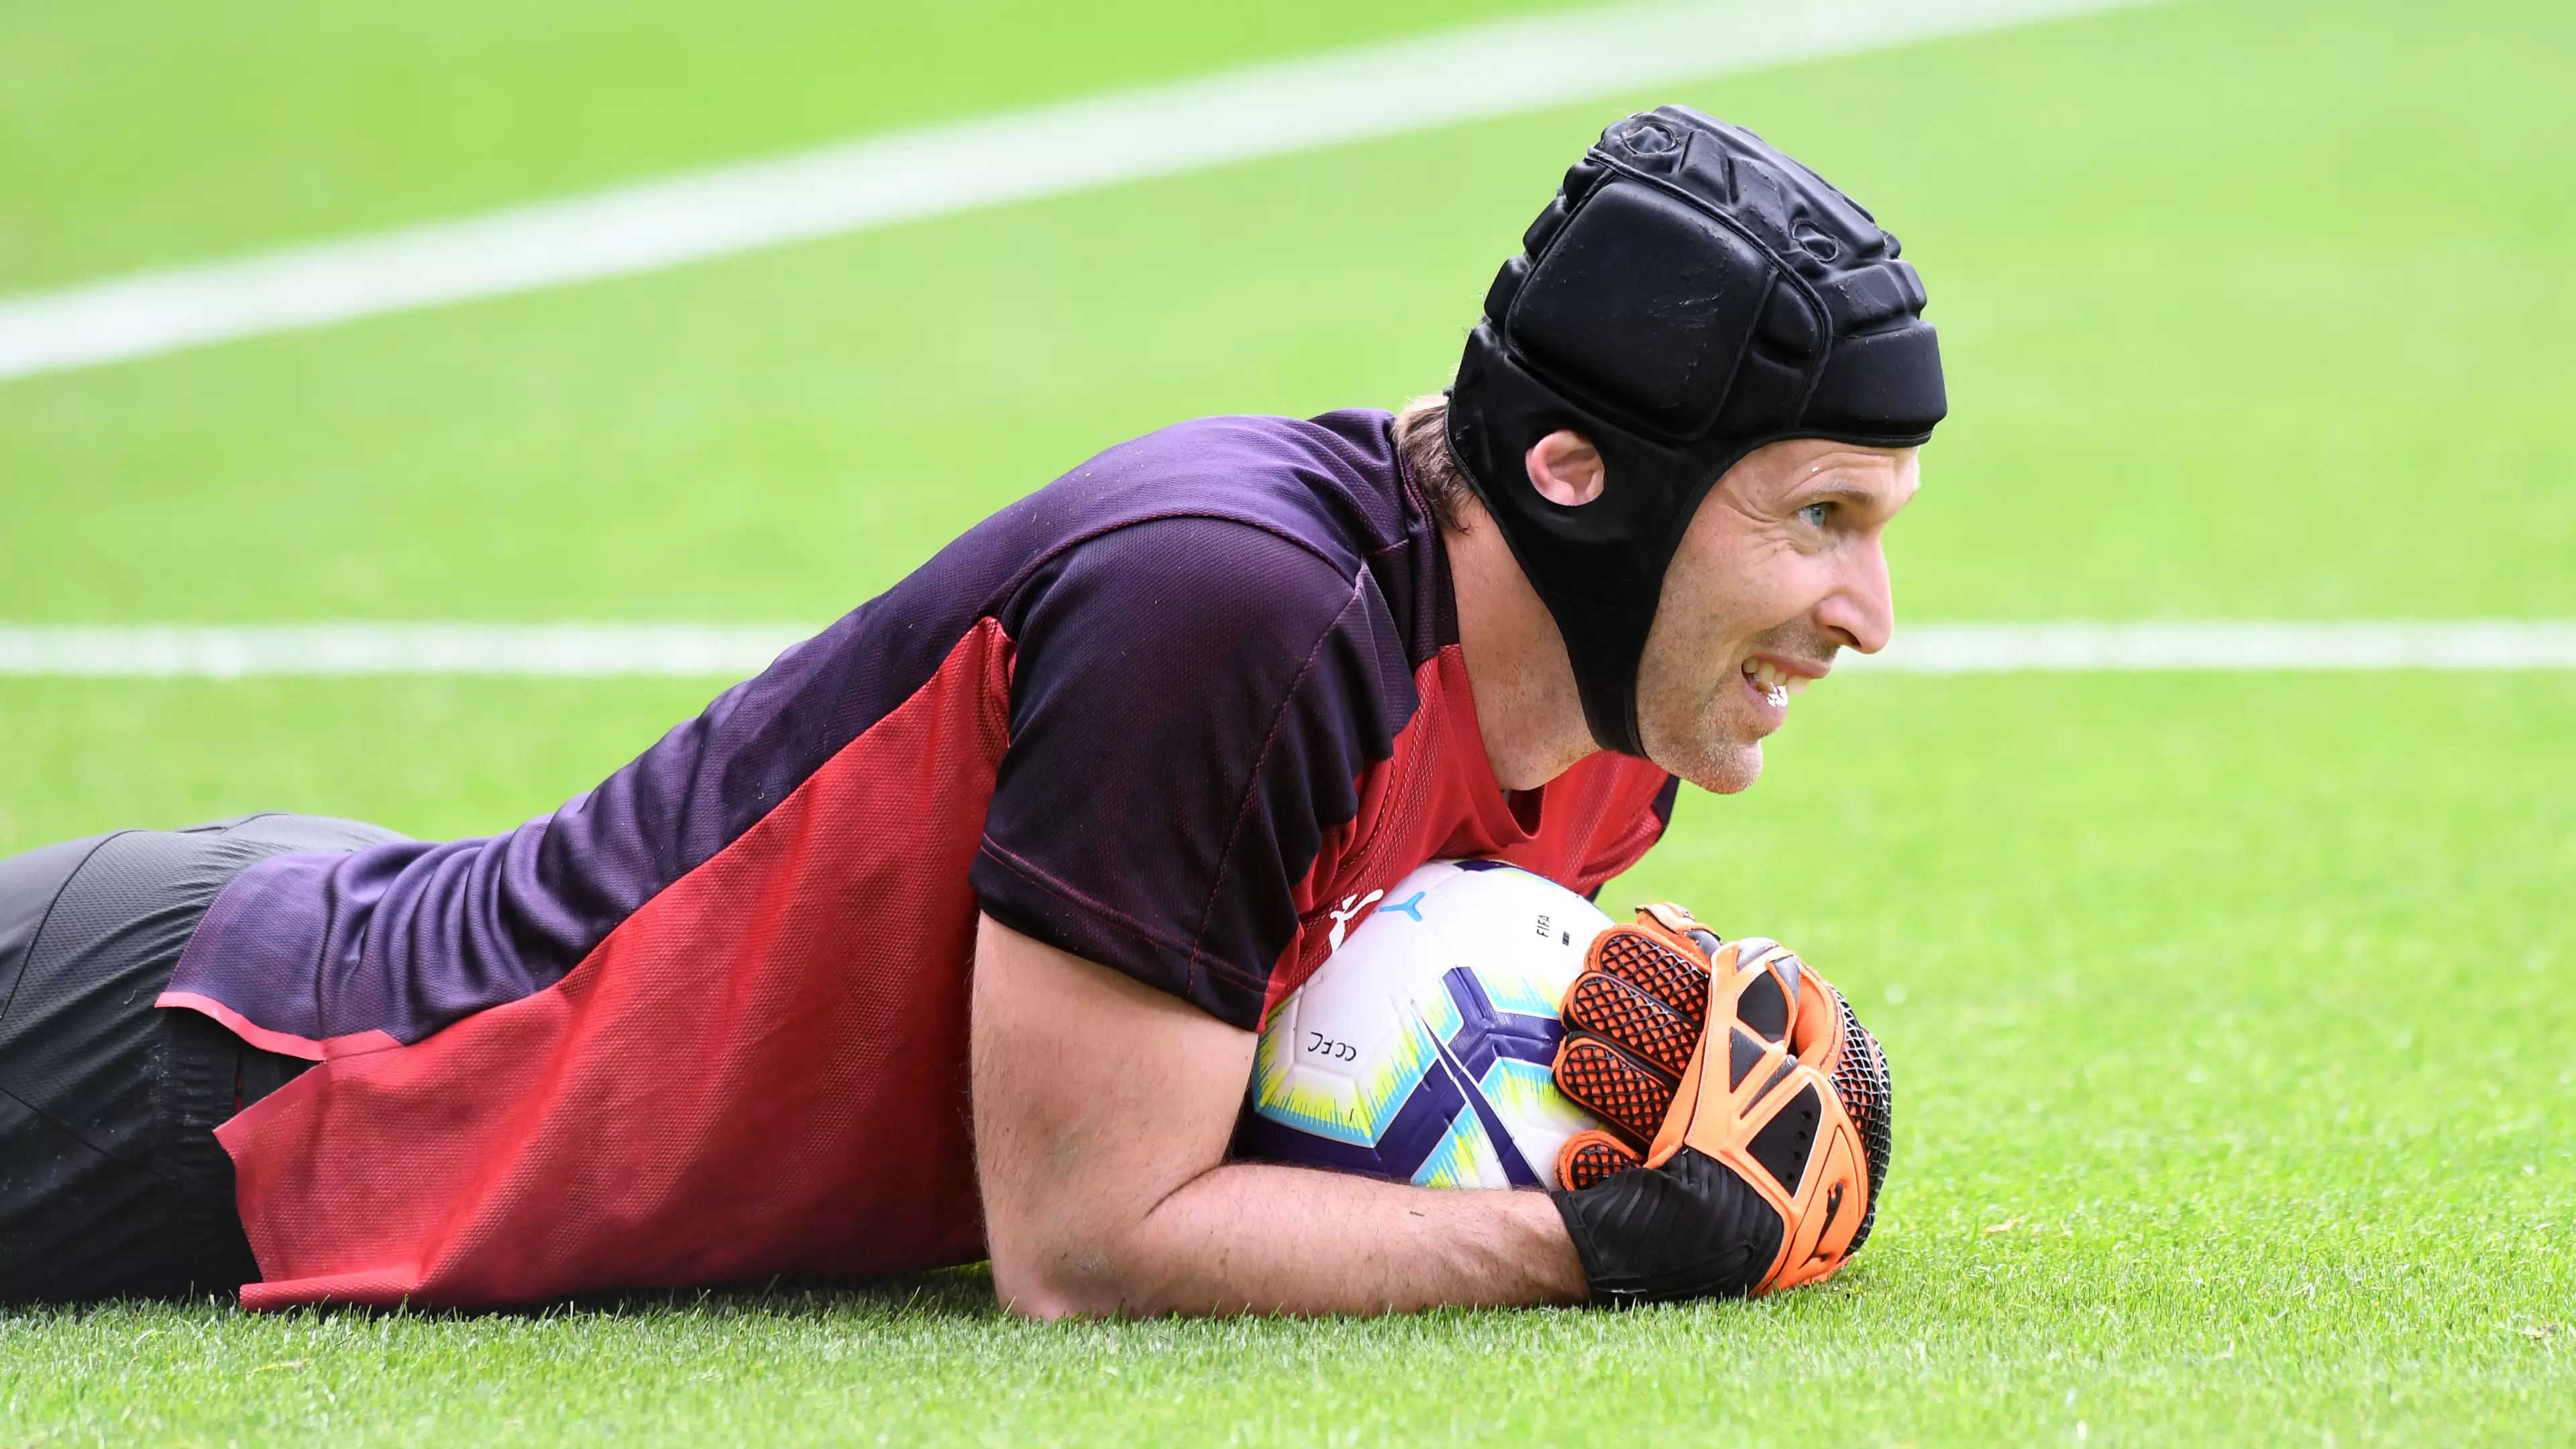 BREAKING: Petr Cech Announces He Will Retire At The End Of The Season 